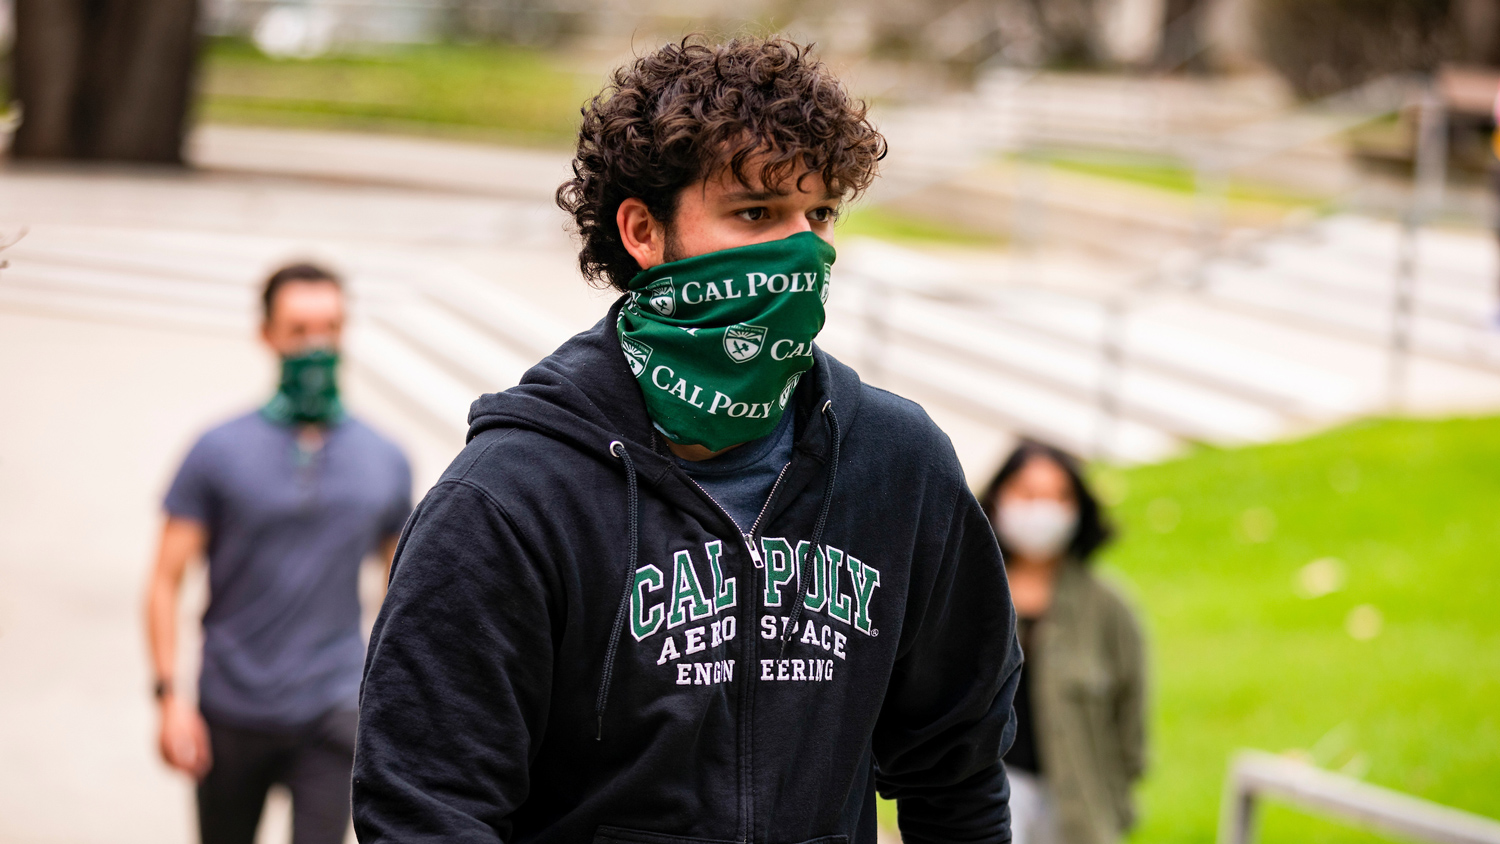 A man wearing a Cal Poly face covering and sweatshirt walks on campus with two people in masks behind him